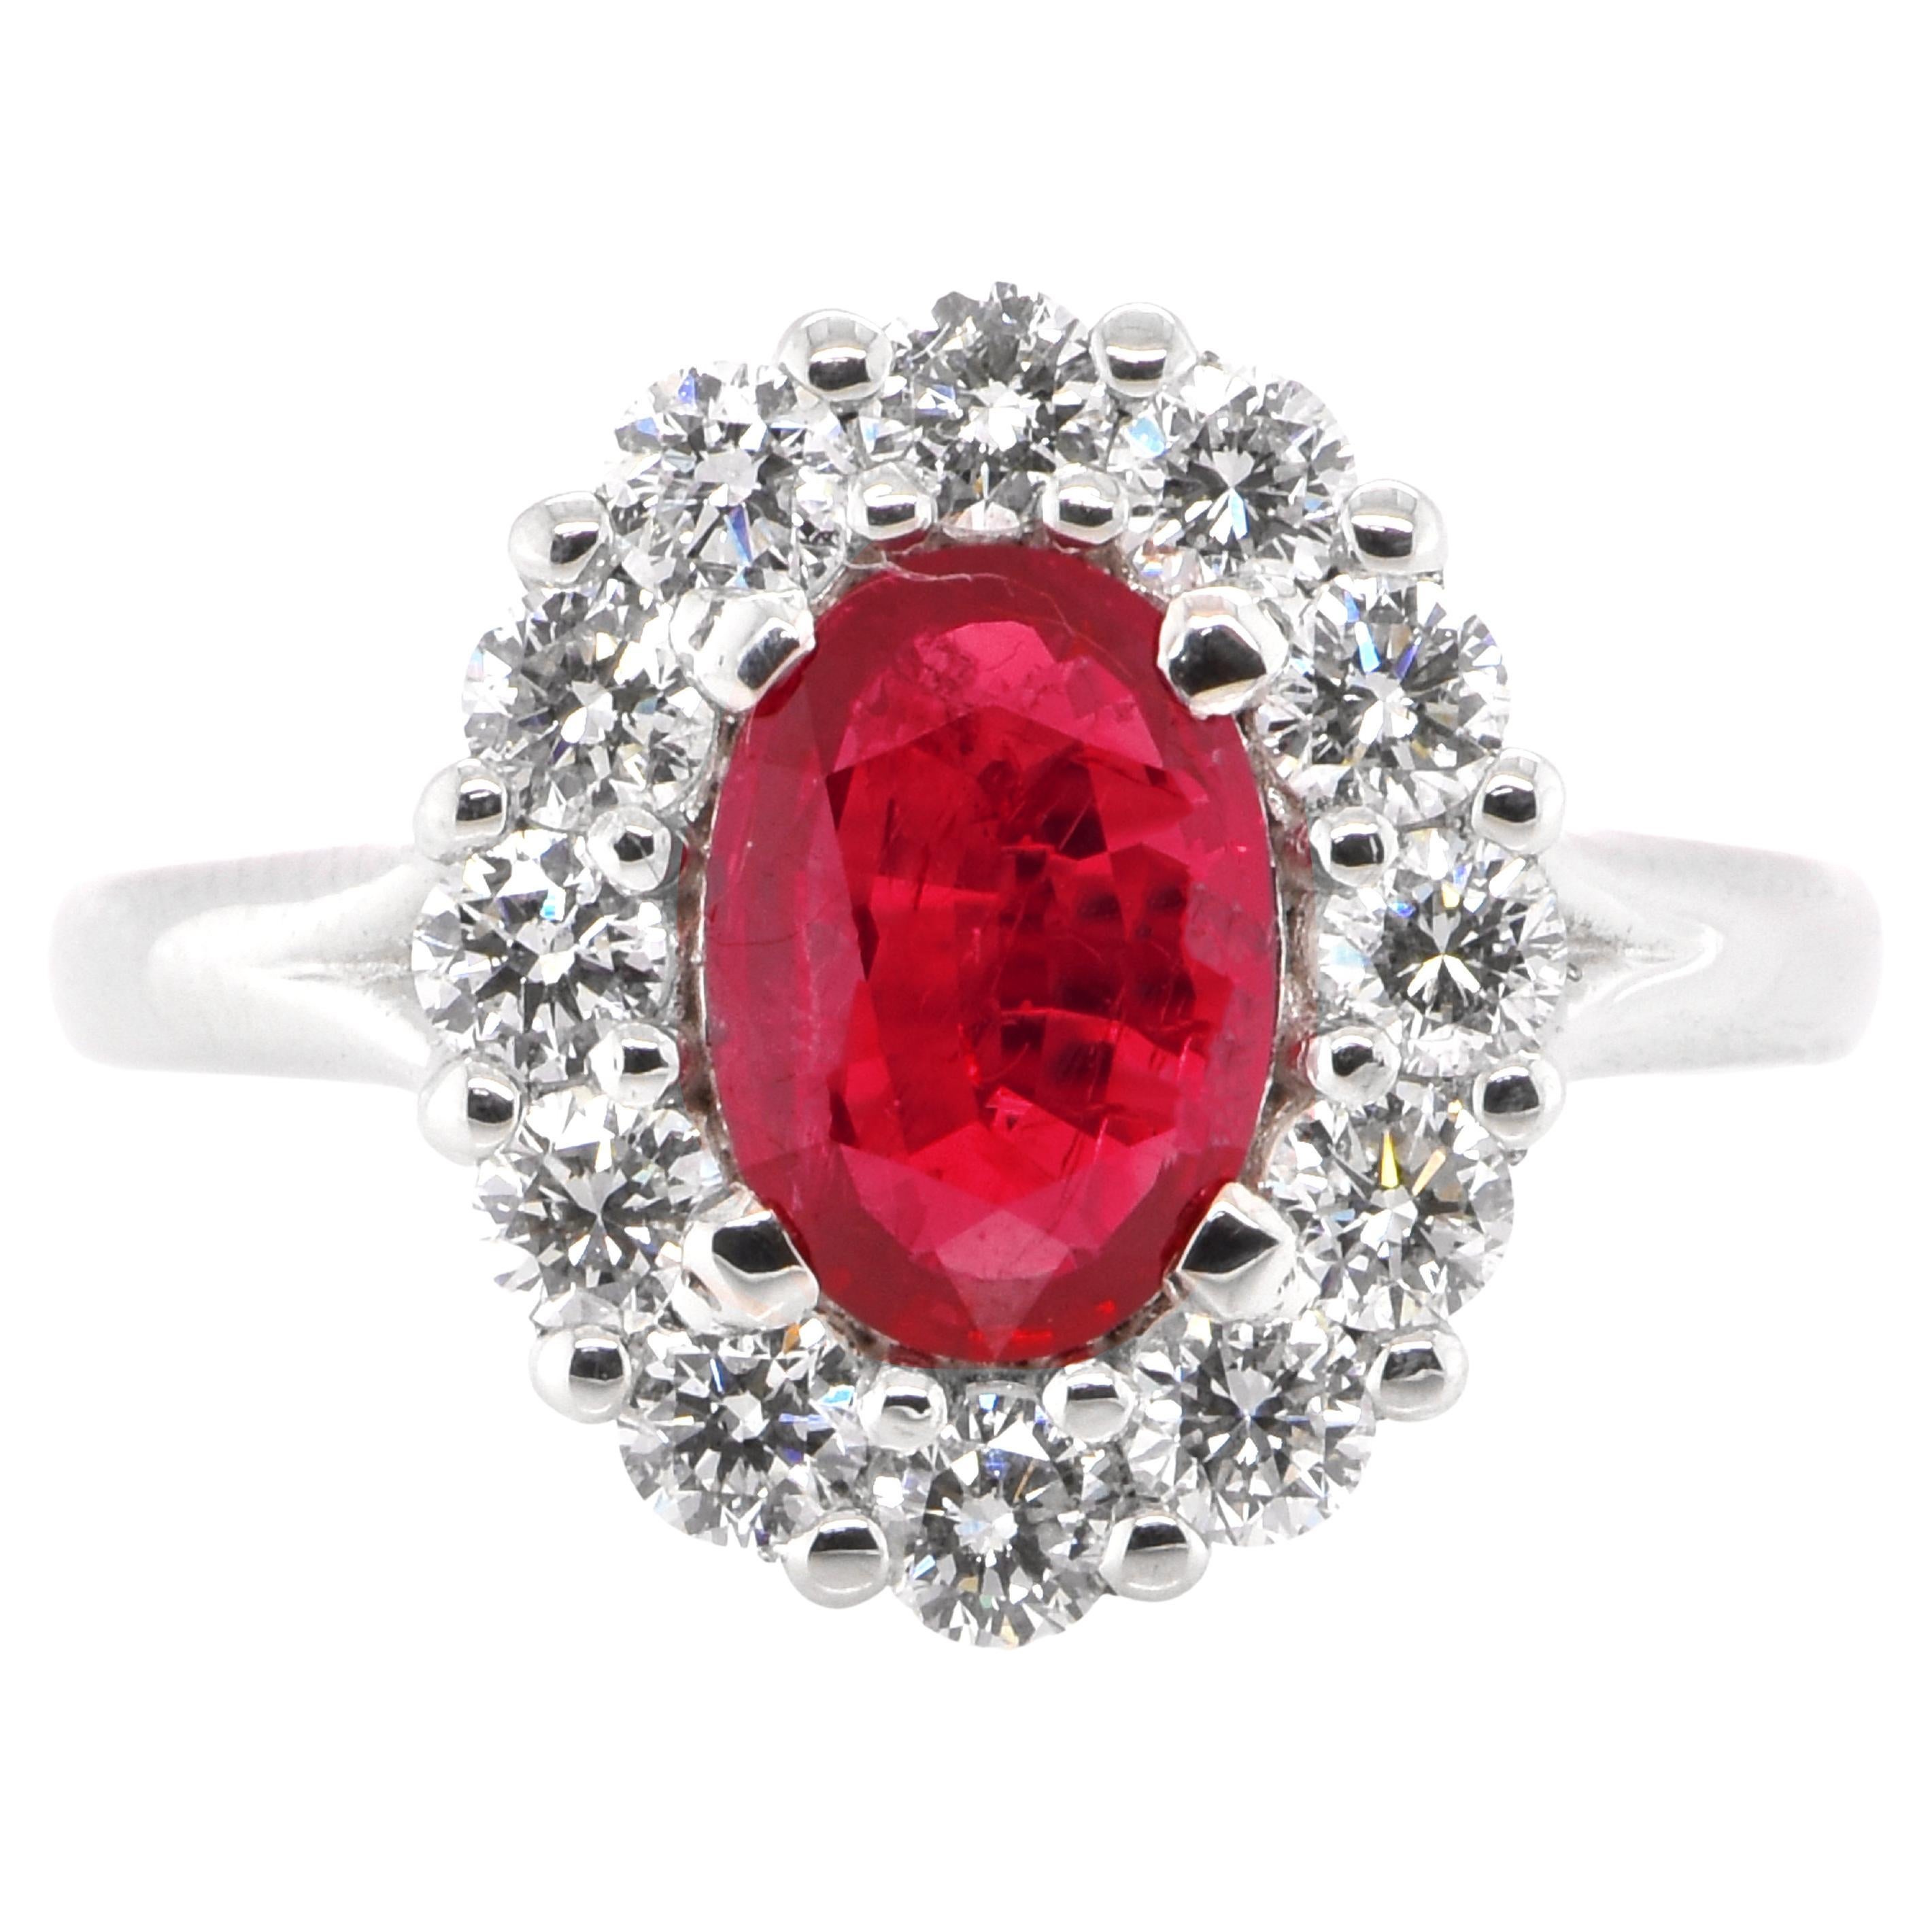 GRS Certified 1.51 Carat Unheated Pigeon's Blood Color Ruby Ring Set in Platinum